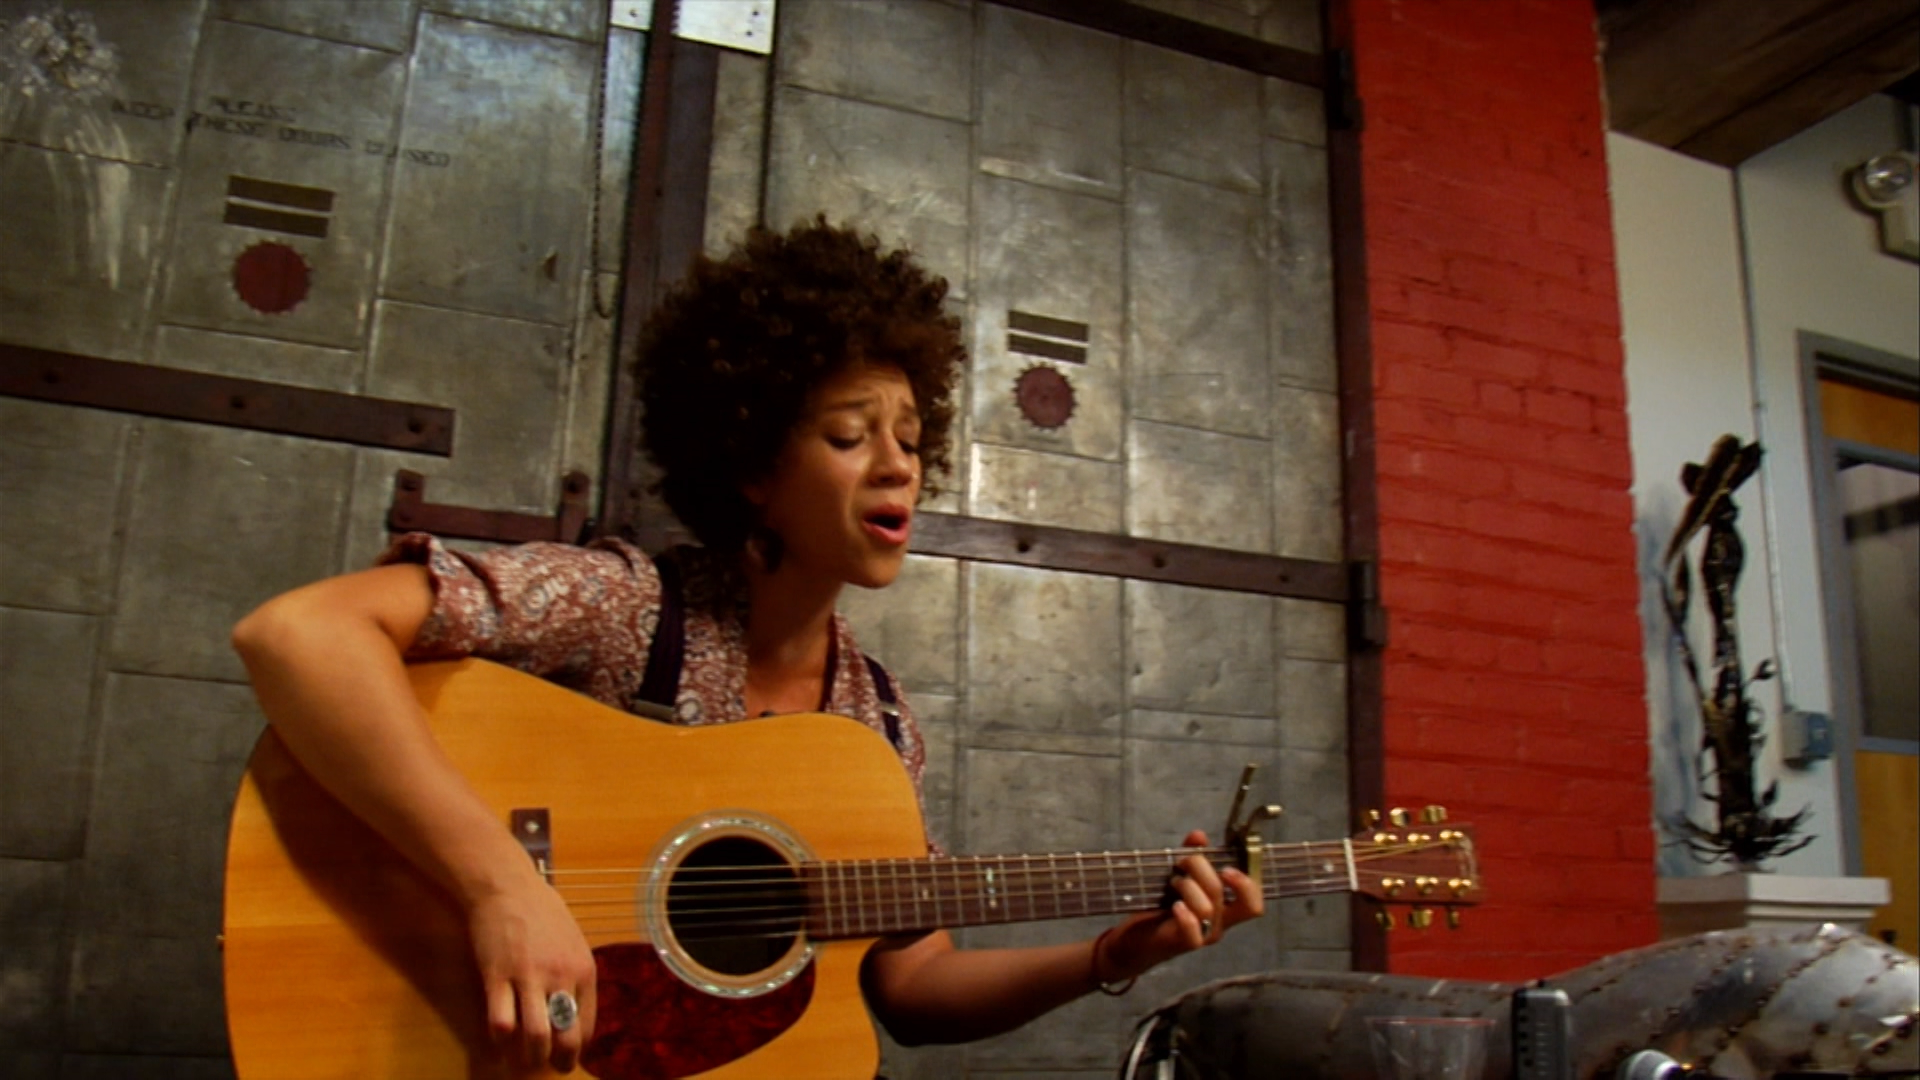 Chastity Brown: Plans of Buildin'